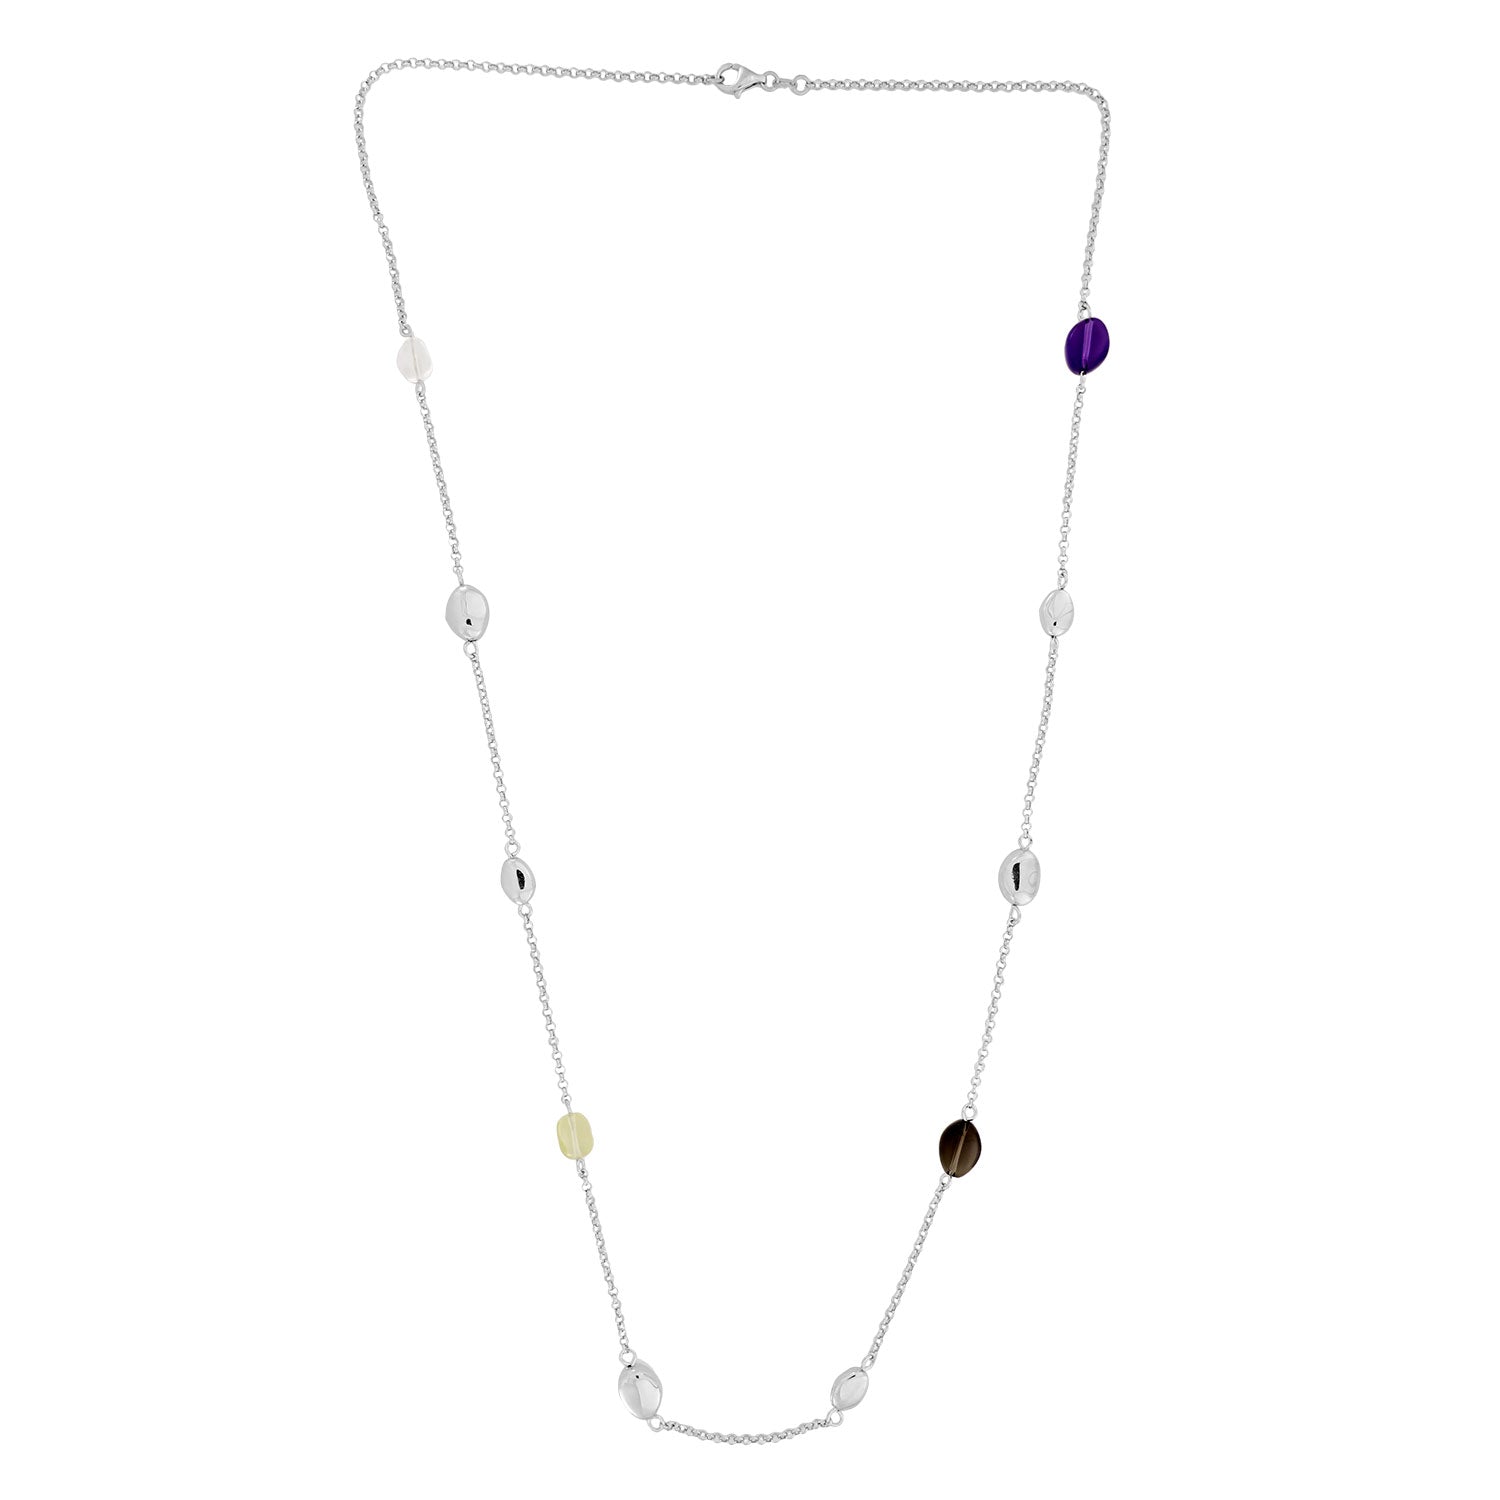 Long Silver Necklace with Amethyst and Quartz